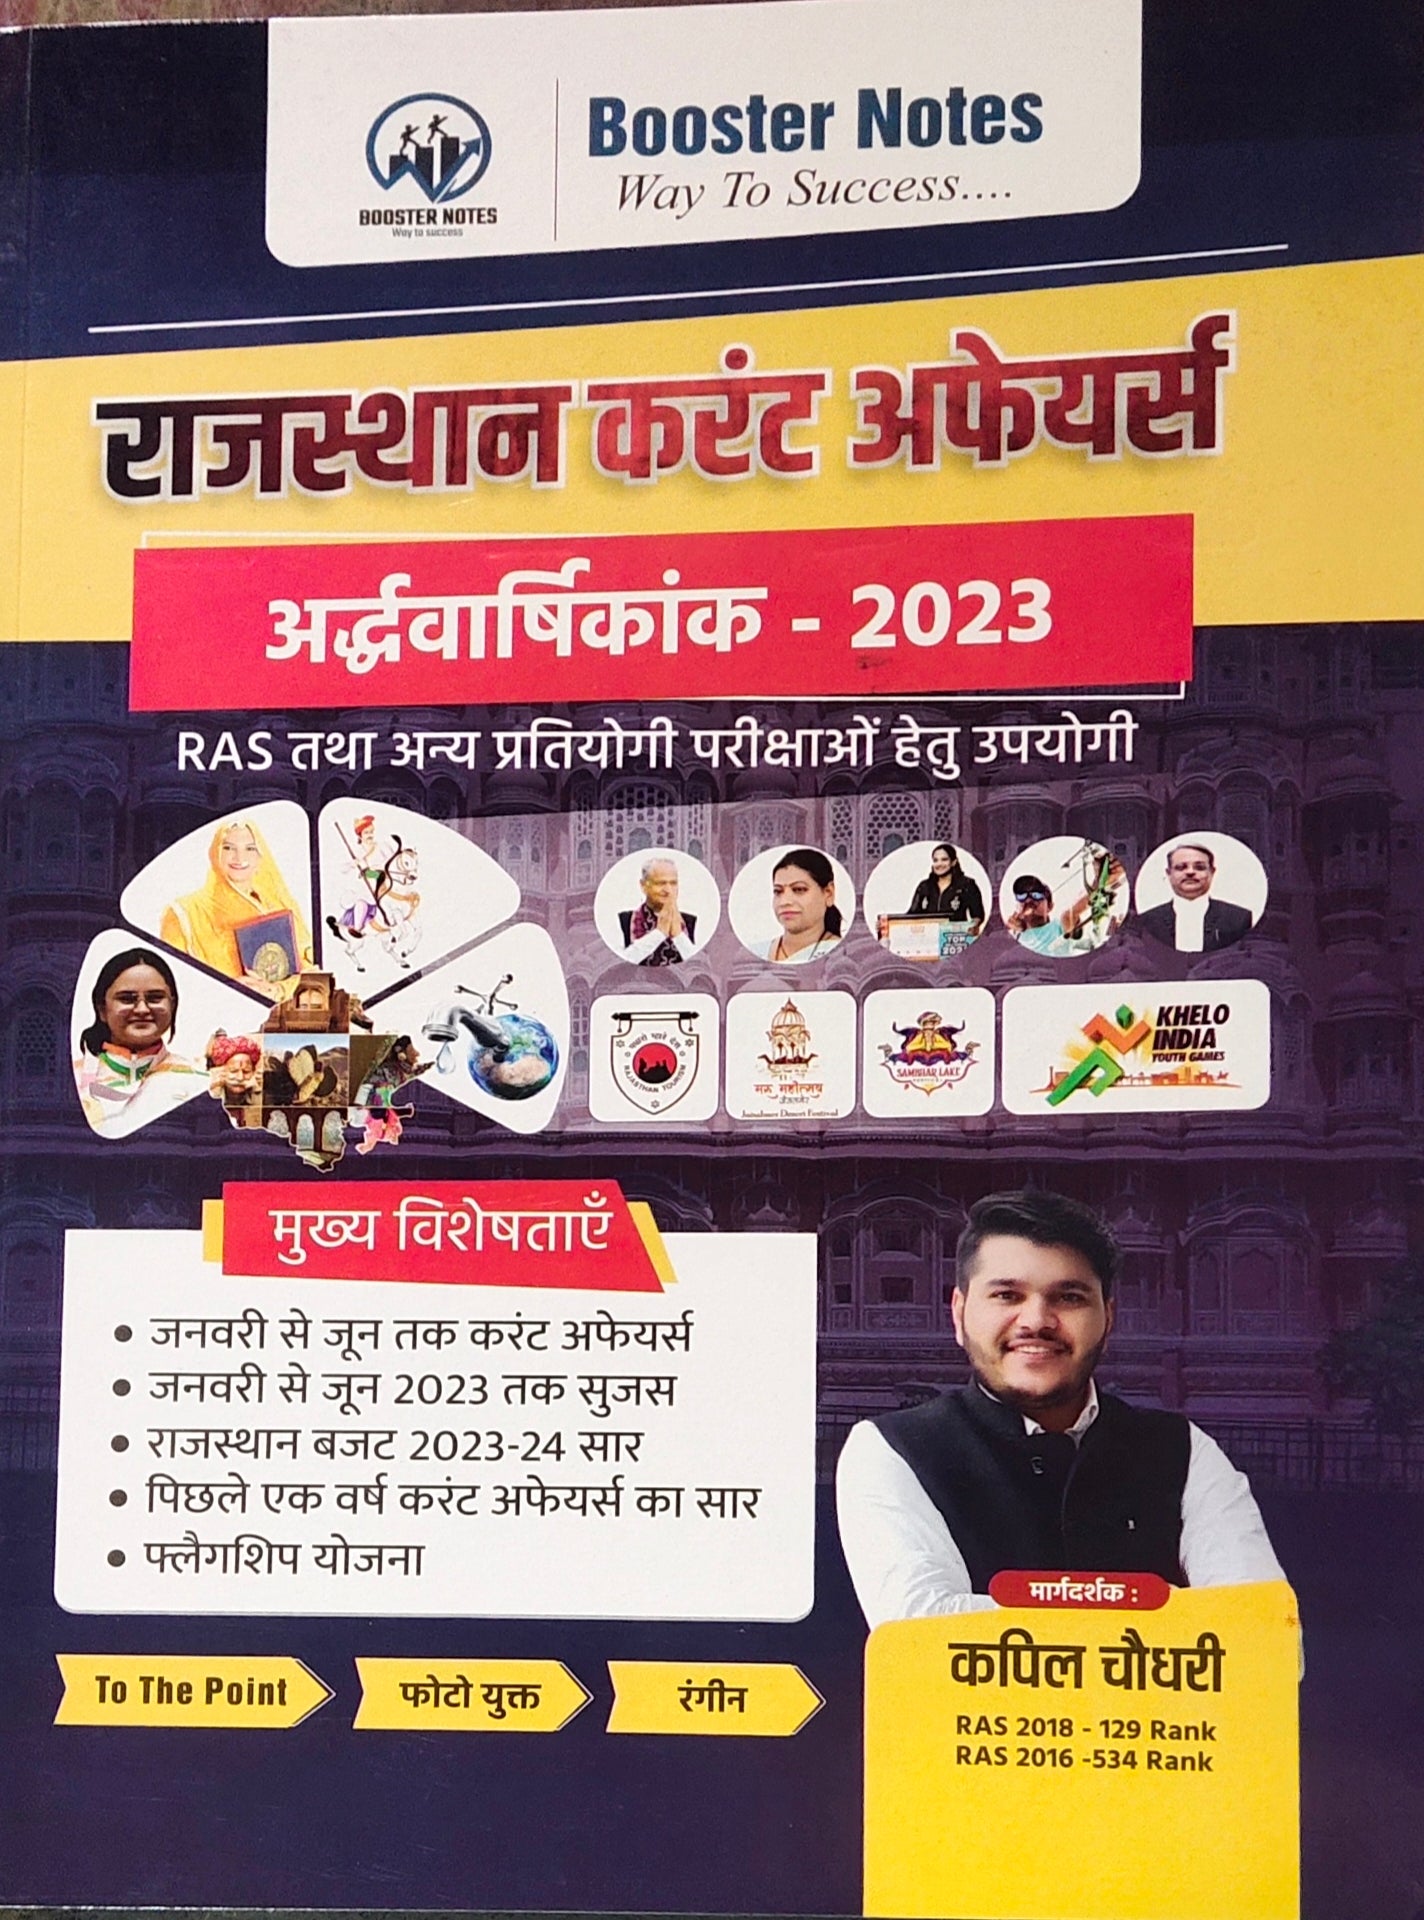 Booster notes Rajasthan current affairs half-yearly -2023